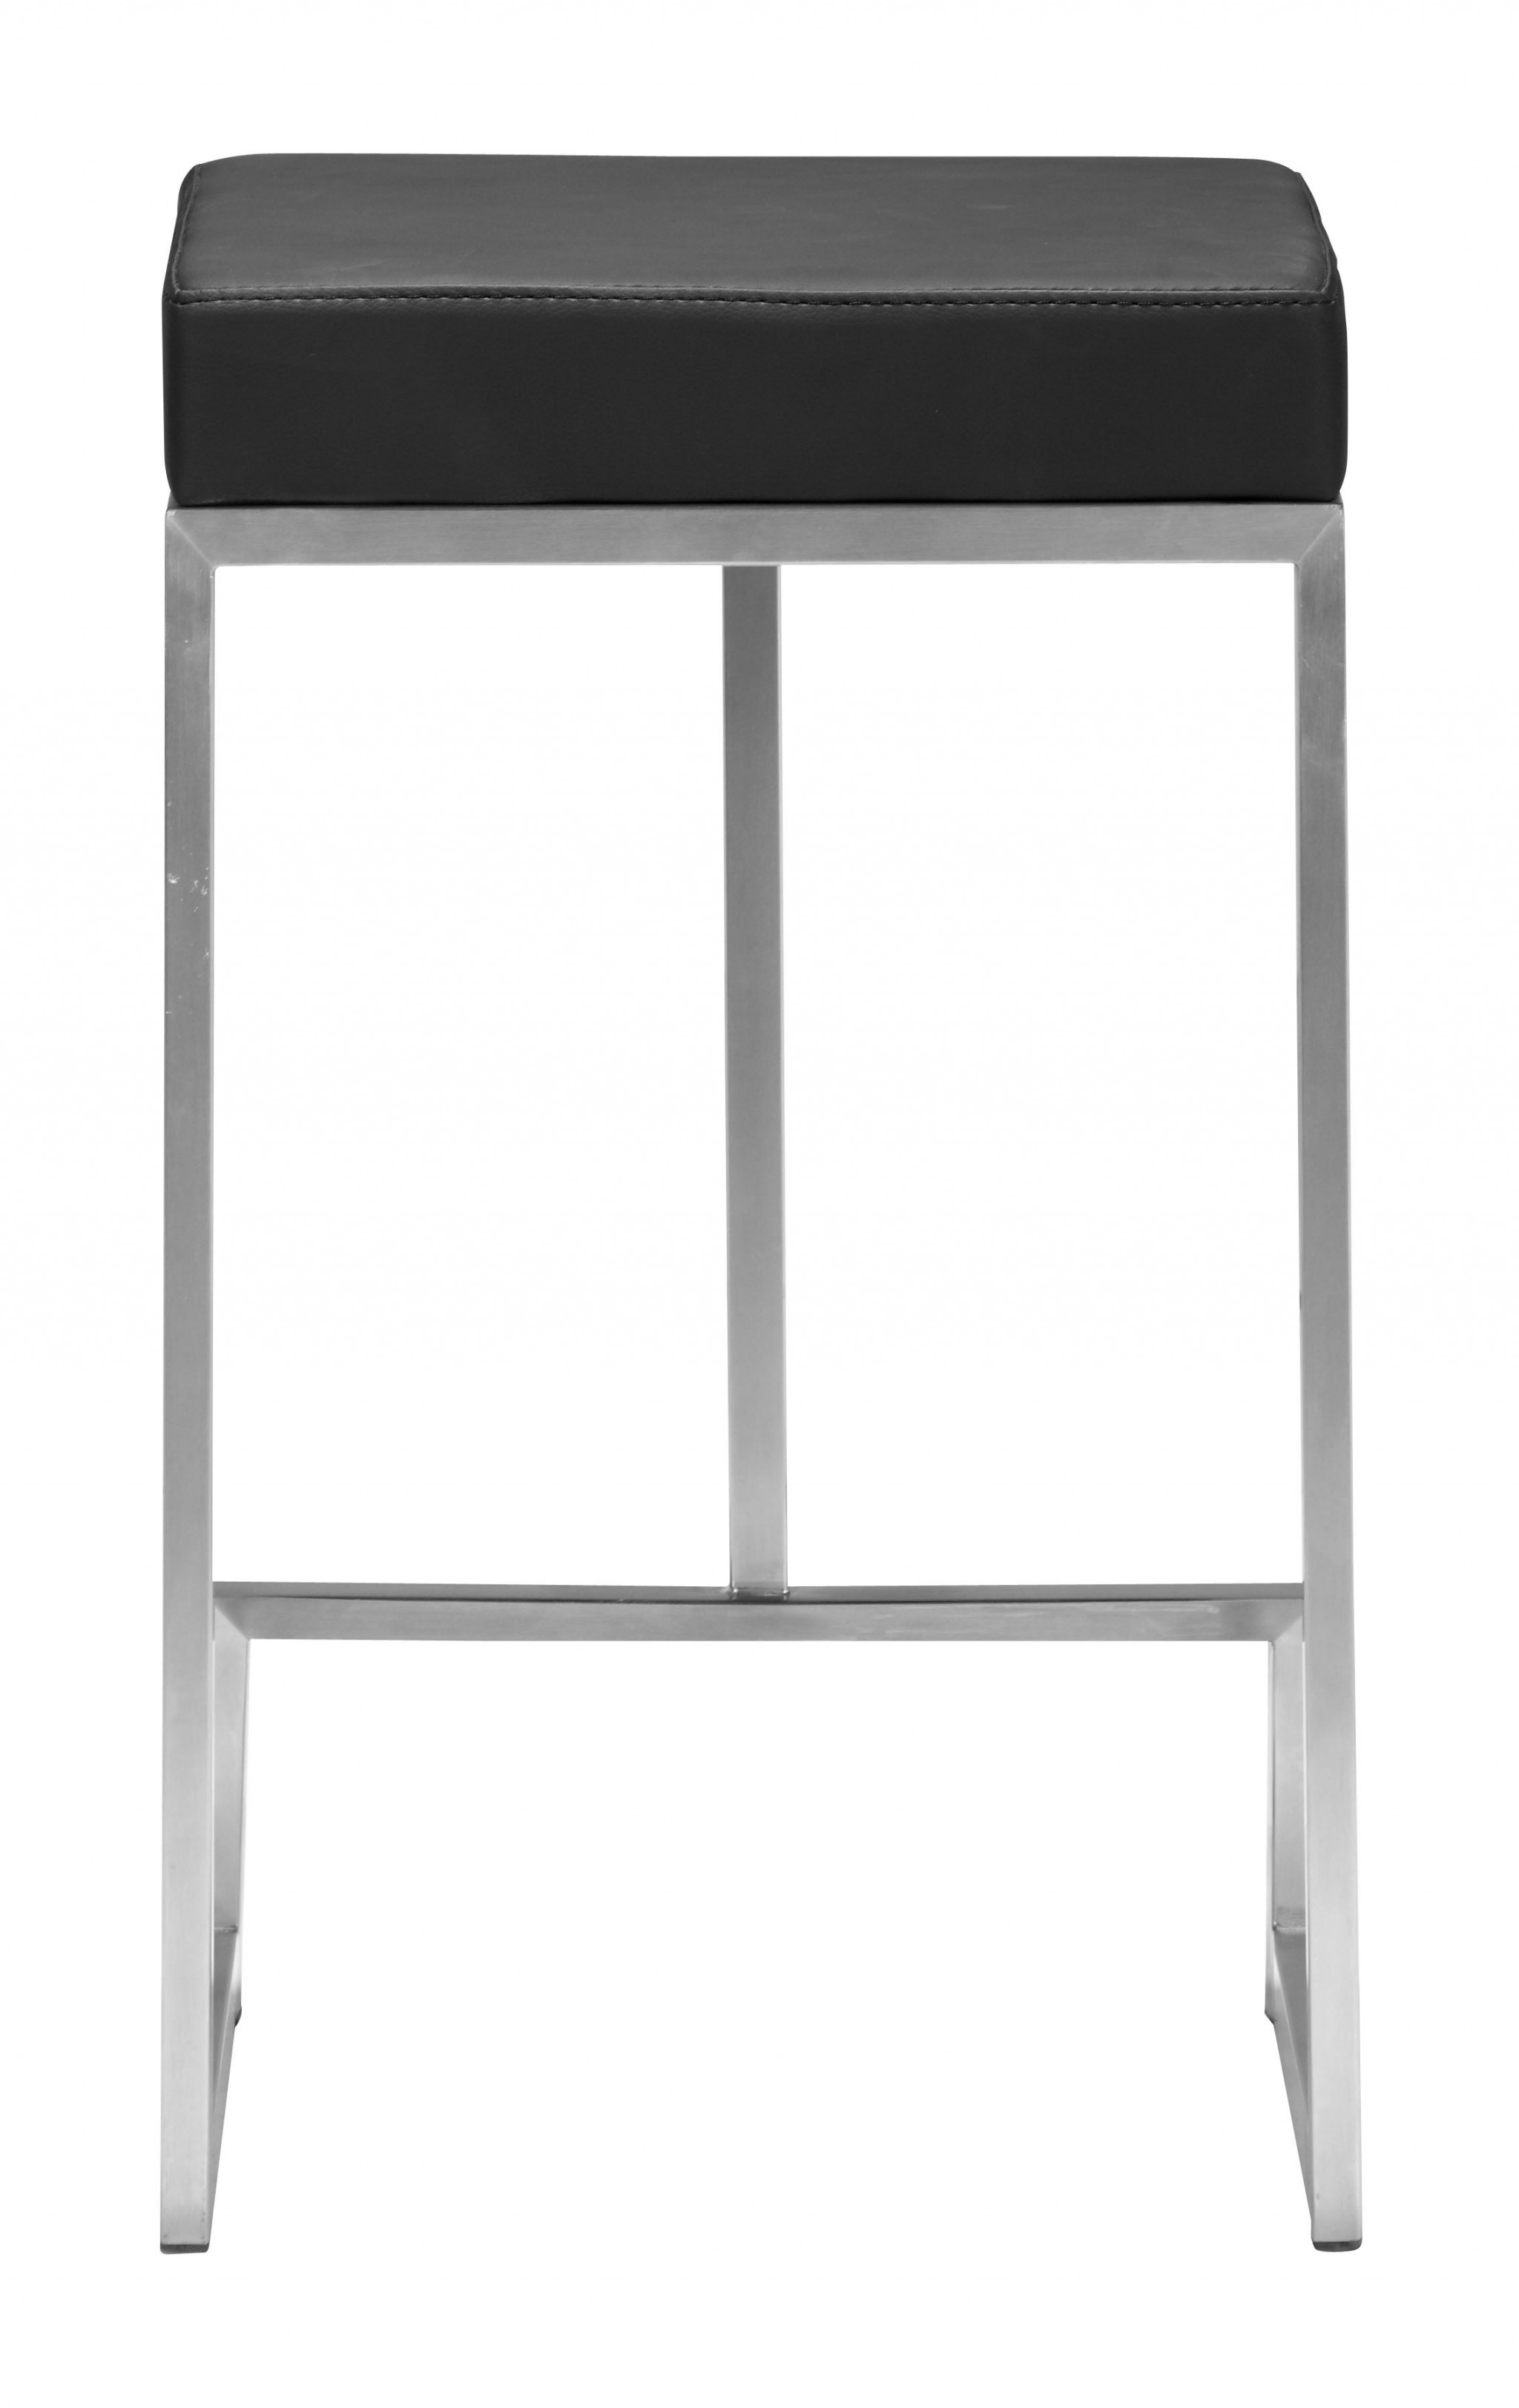 Set of Two Black Faux Leather and Stainless Geometric Backless Counter Stools